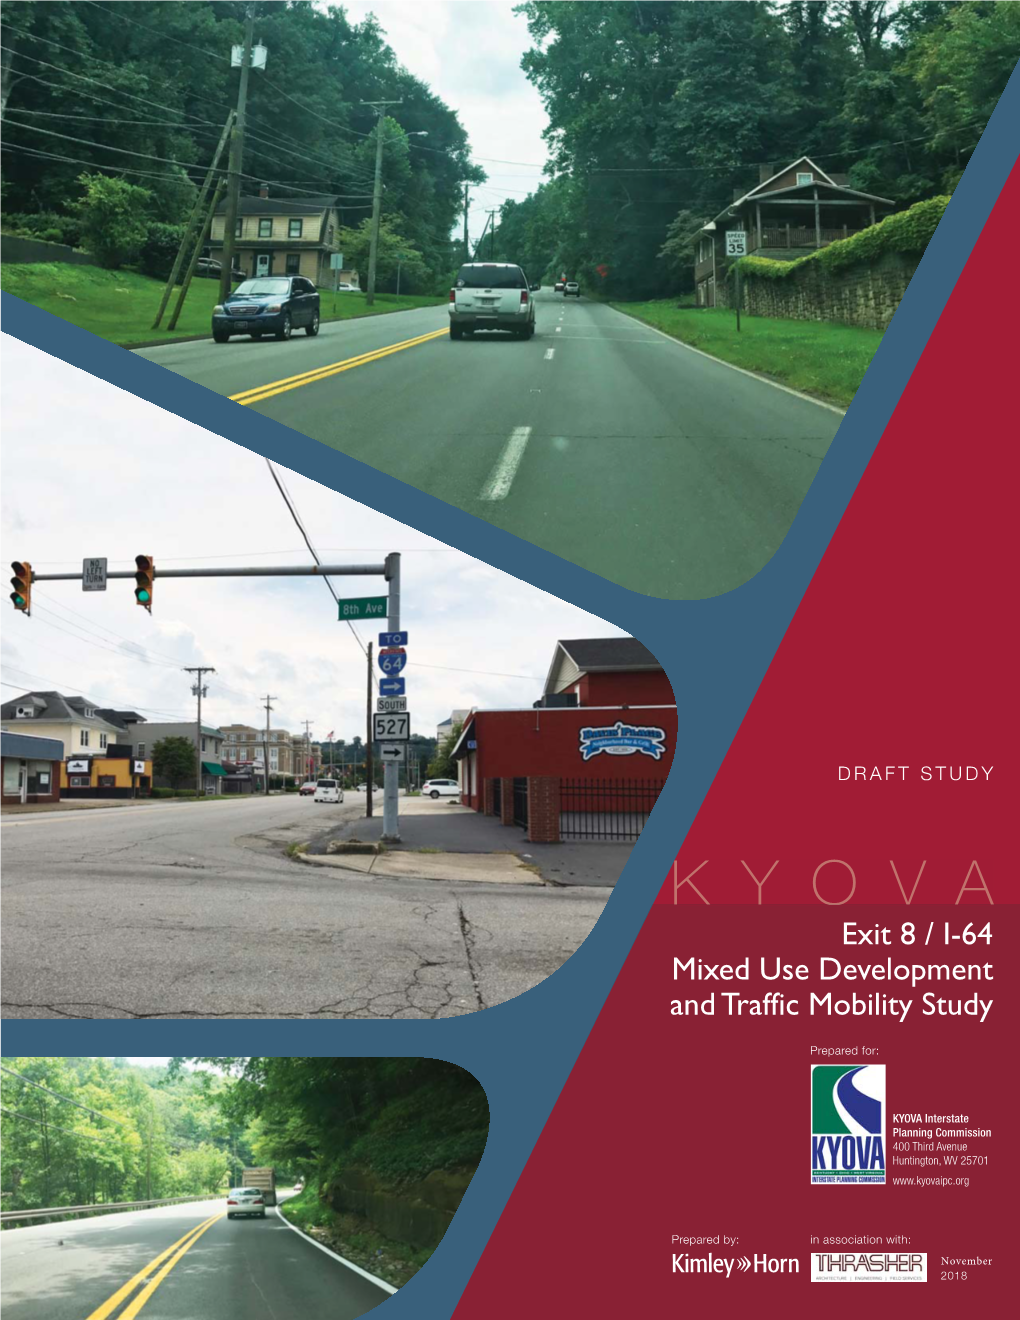 Exit 8 / I-64 Mixed Use Development and Traffic Mobility Study